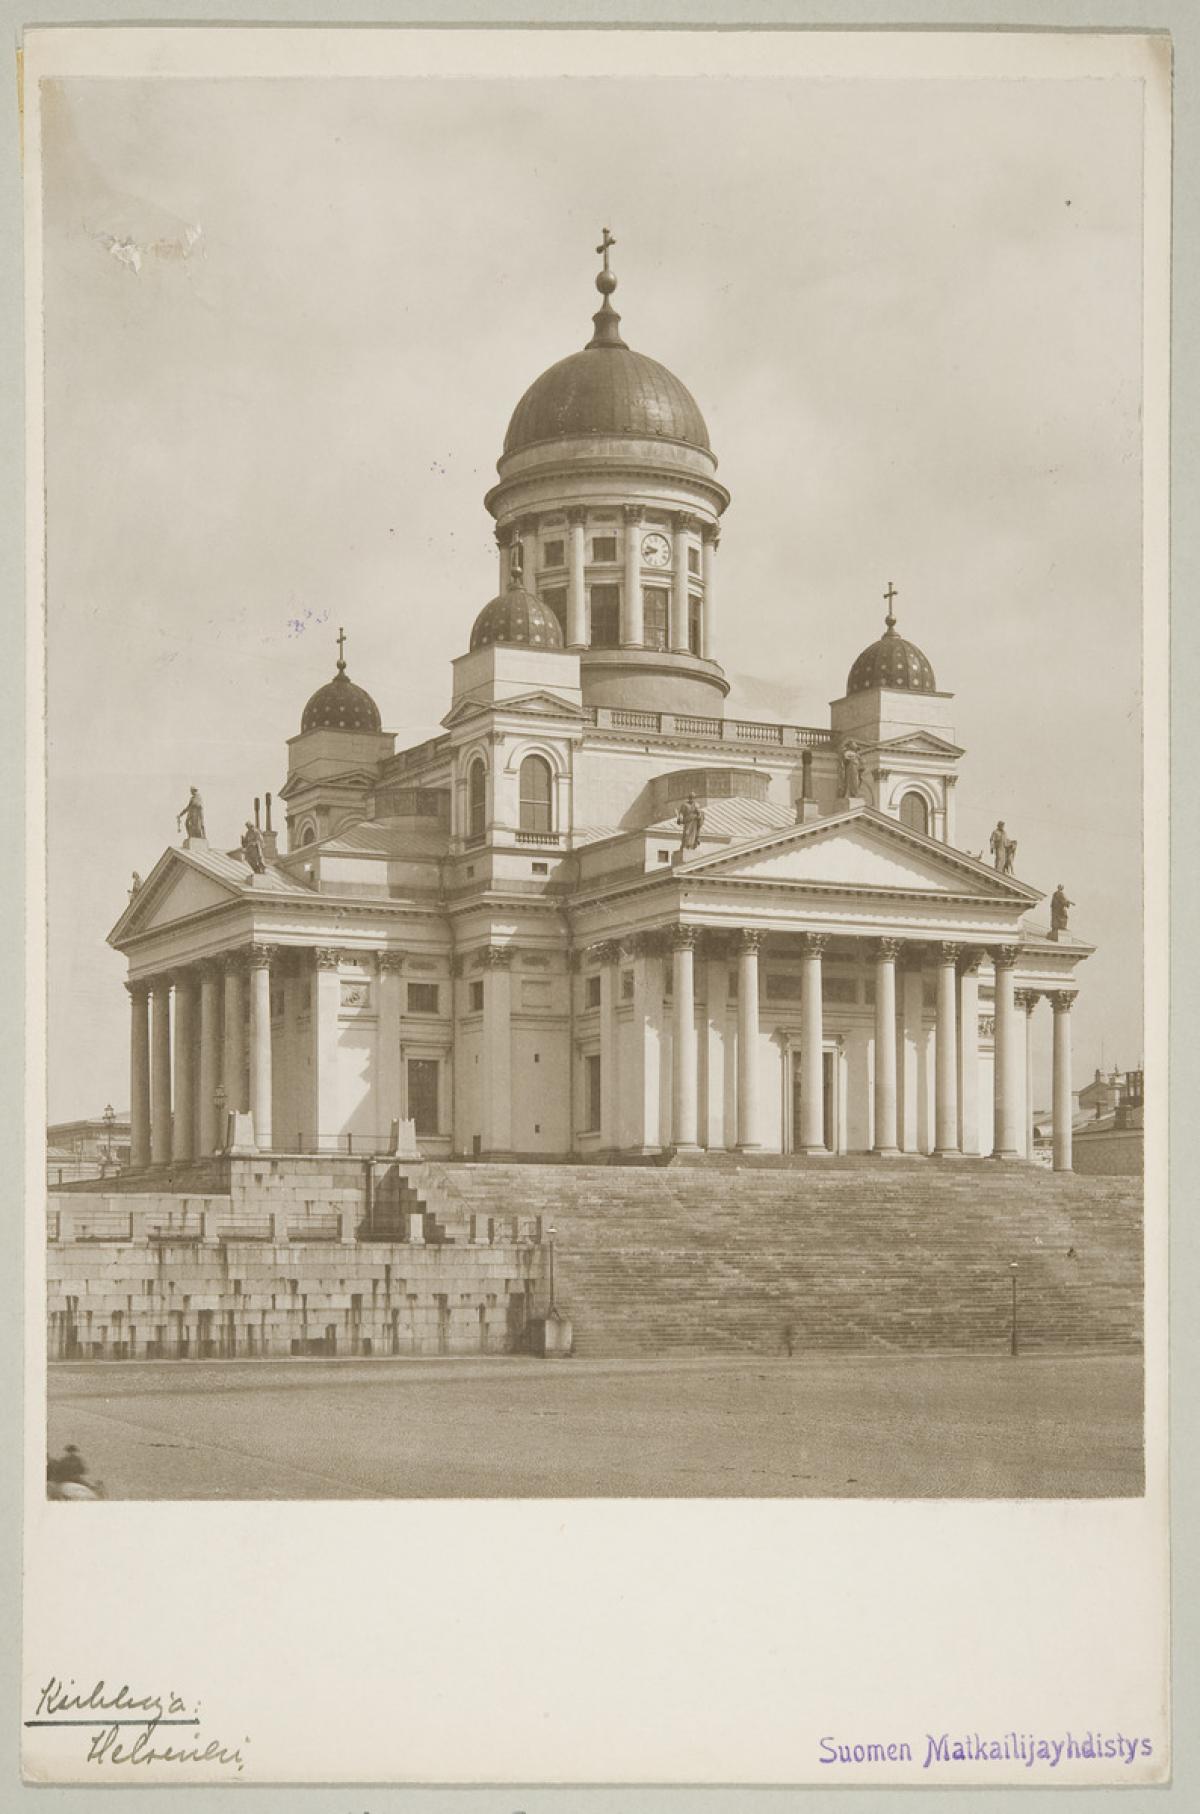 The Helsinki Cathedral, formerly St. Nicholas’ Church, is one of Helsinki's central landmarks and the "crown of the city". Engel himself noted that its "external elegance is hard to beat". The Main Guard Post below the church on the edge of the square was demolished in the 1840s, and the current steps leading up to the church terrace were built in its place. After Engel's death, other additions deviating from the original plan were made to the church, including corner towers, statues of the apostles, and terrace pavilions on both sides of the steps.  Photo: The Finnish Heritage Agency / Daniel Nyblin